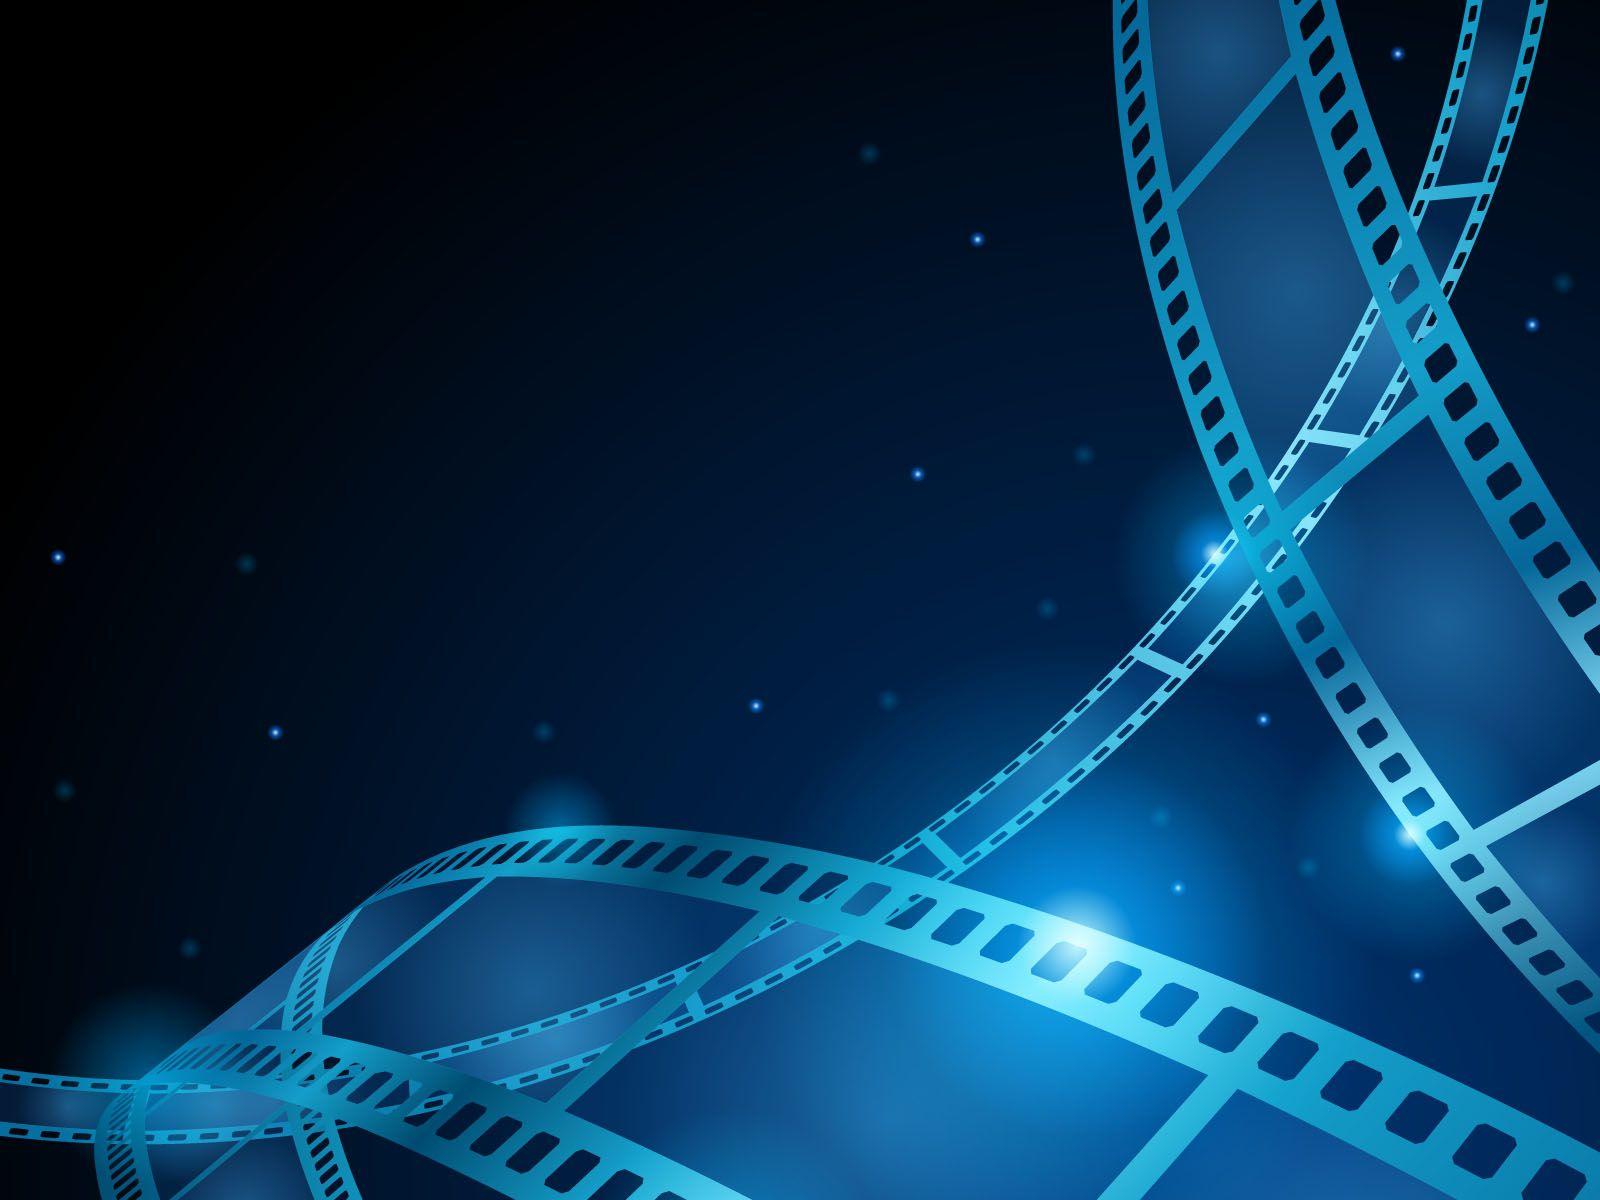 Movie Background Images HD Pictures and Wallpaper For Free Download   Pngtree